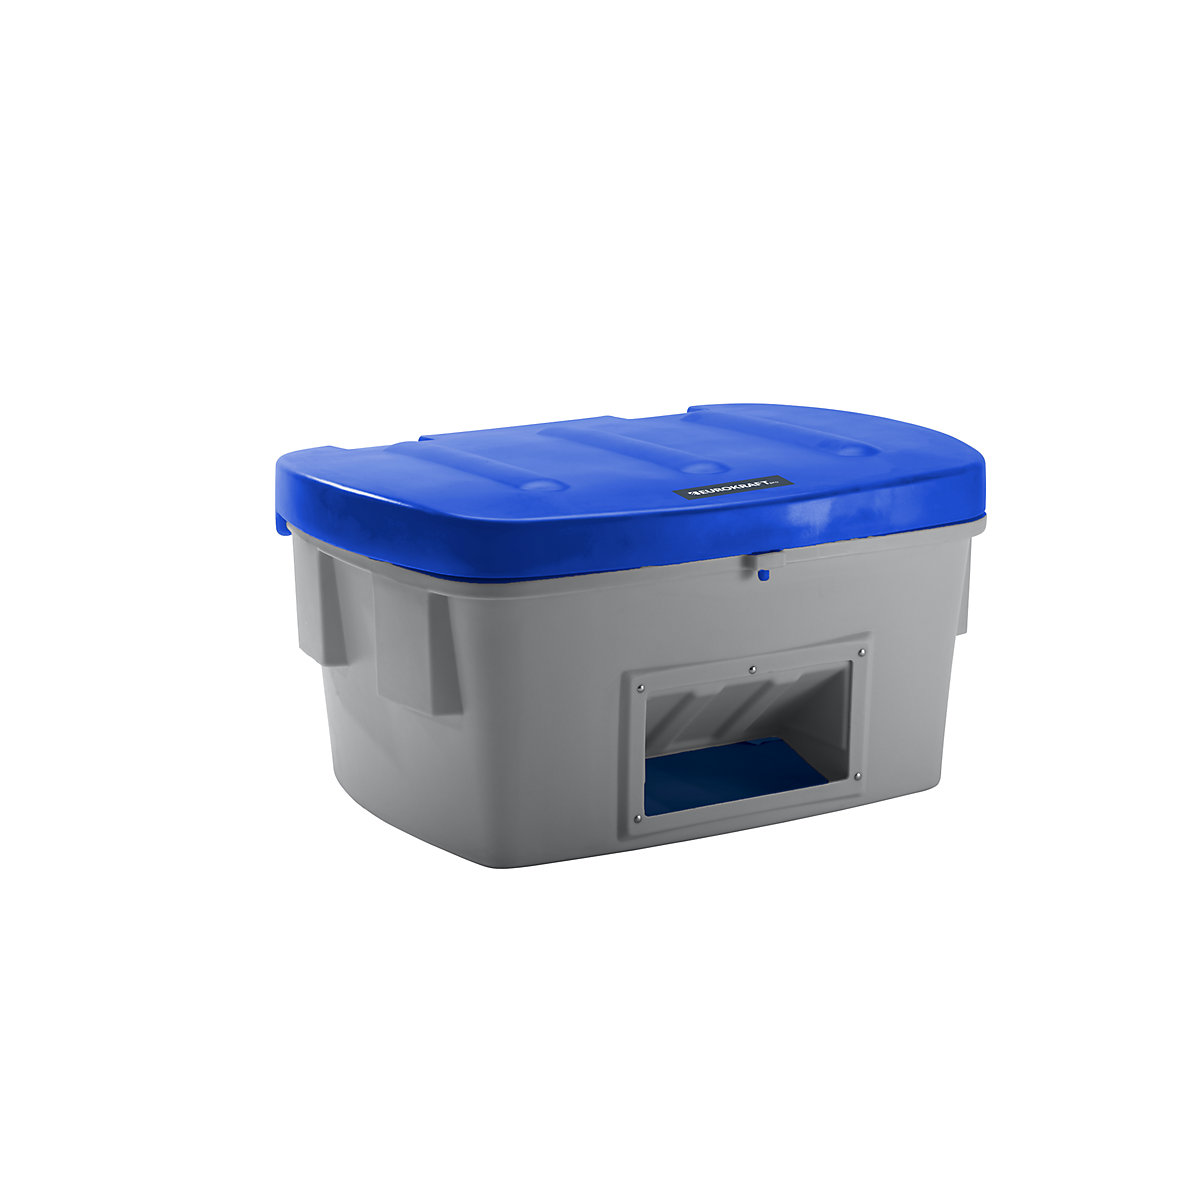 Universal / grit container – eurokraft pro, with dispenser opening, 550 l, blue lid-13